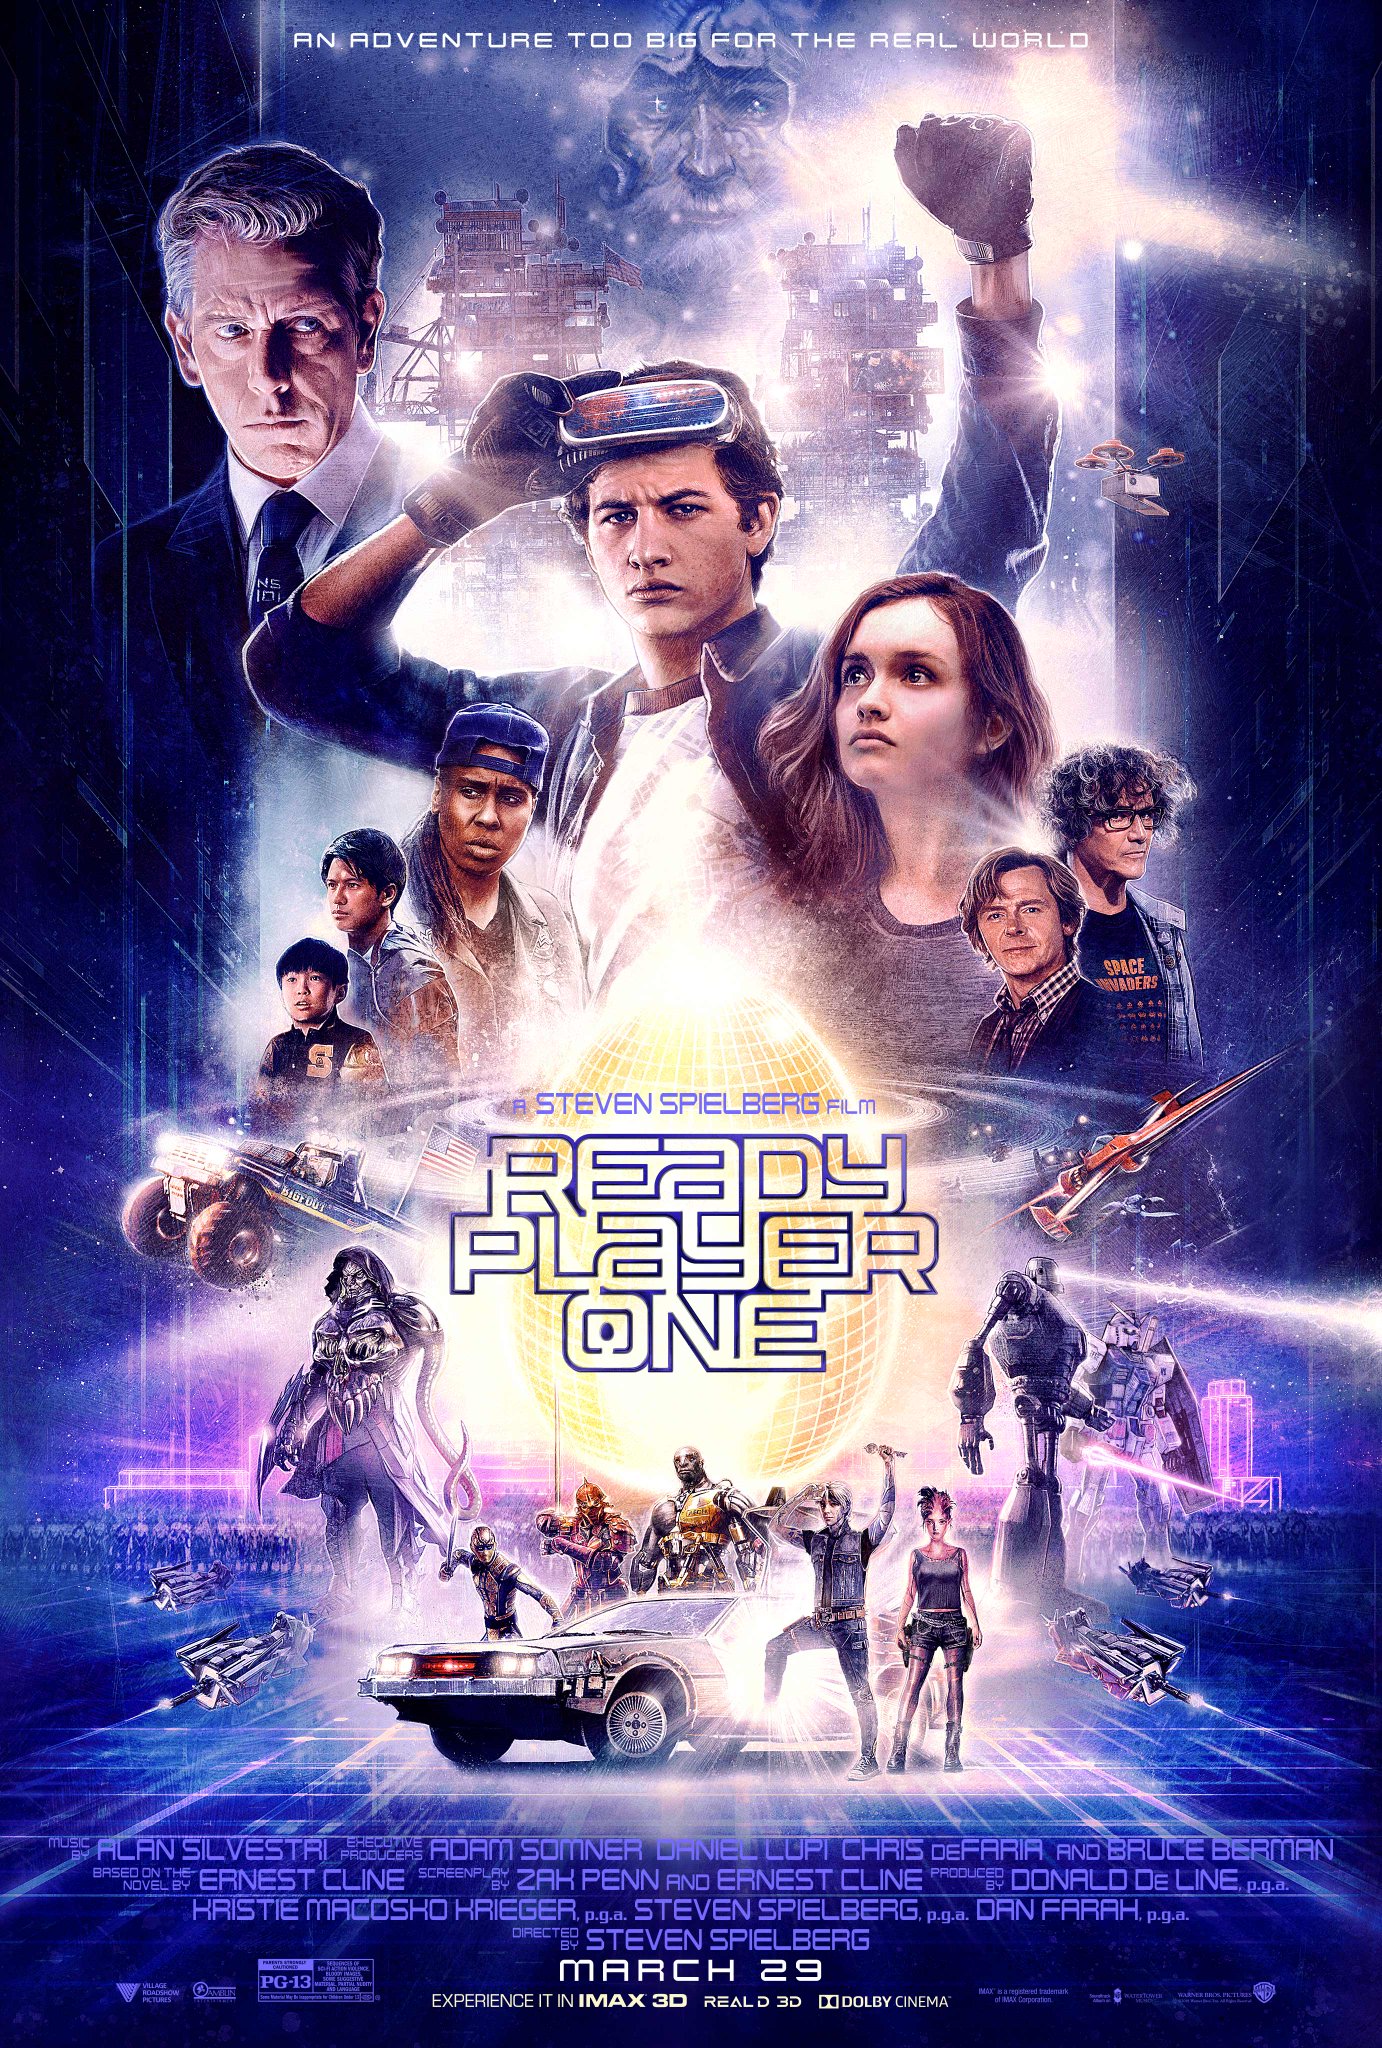 Ready Player One poster | A Steven Spielberg Film